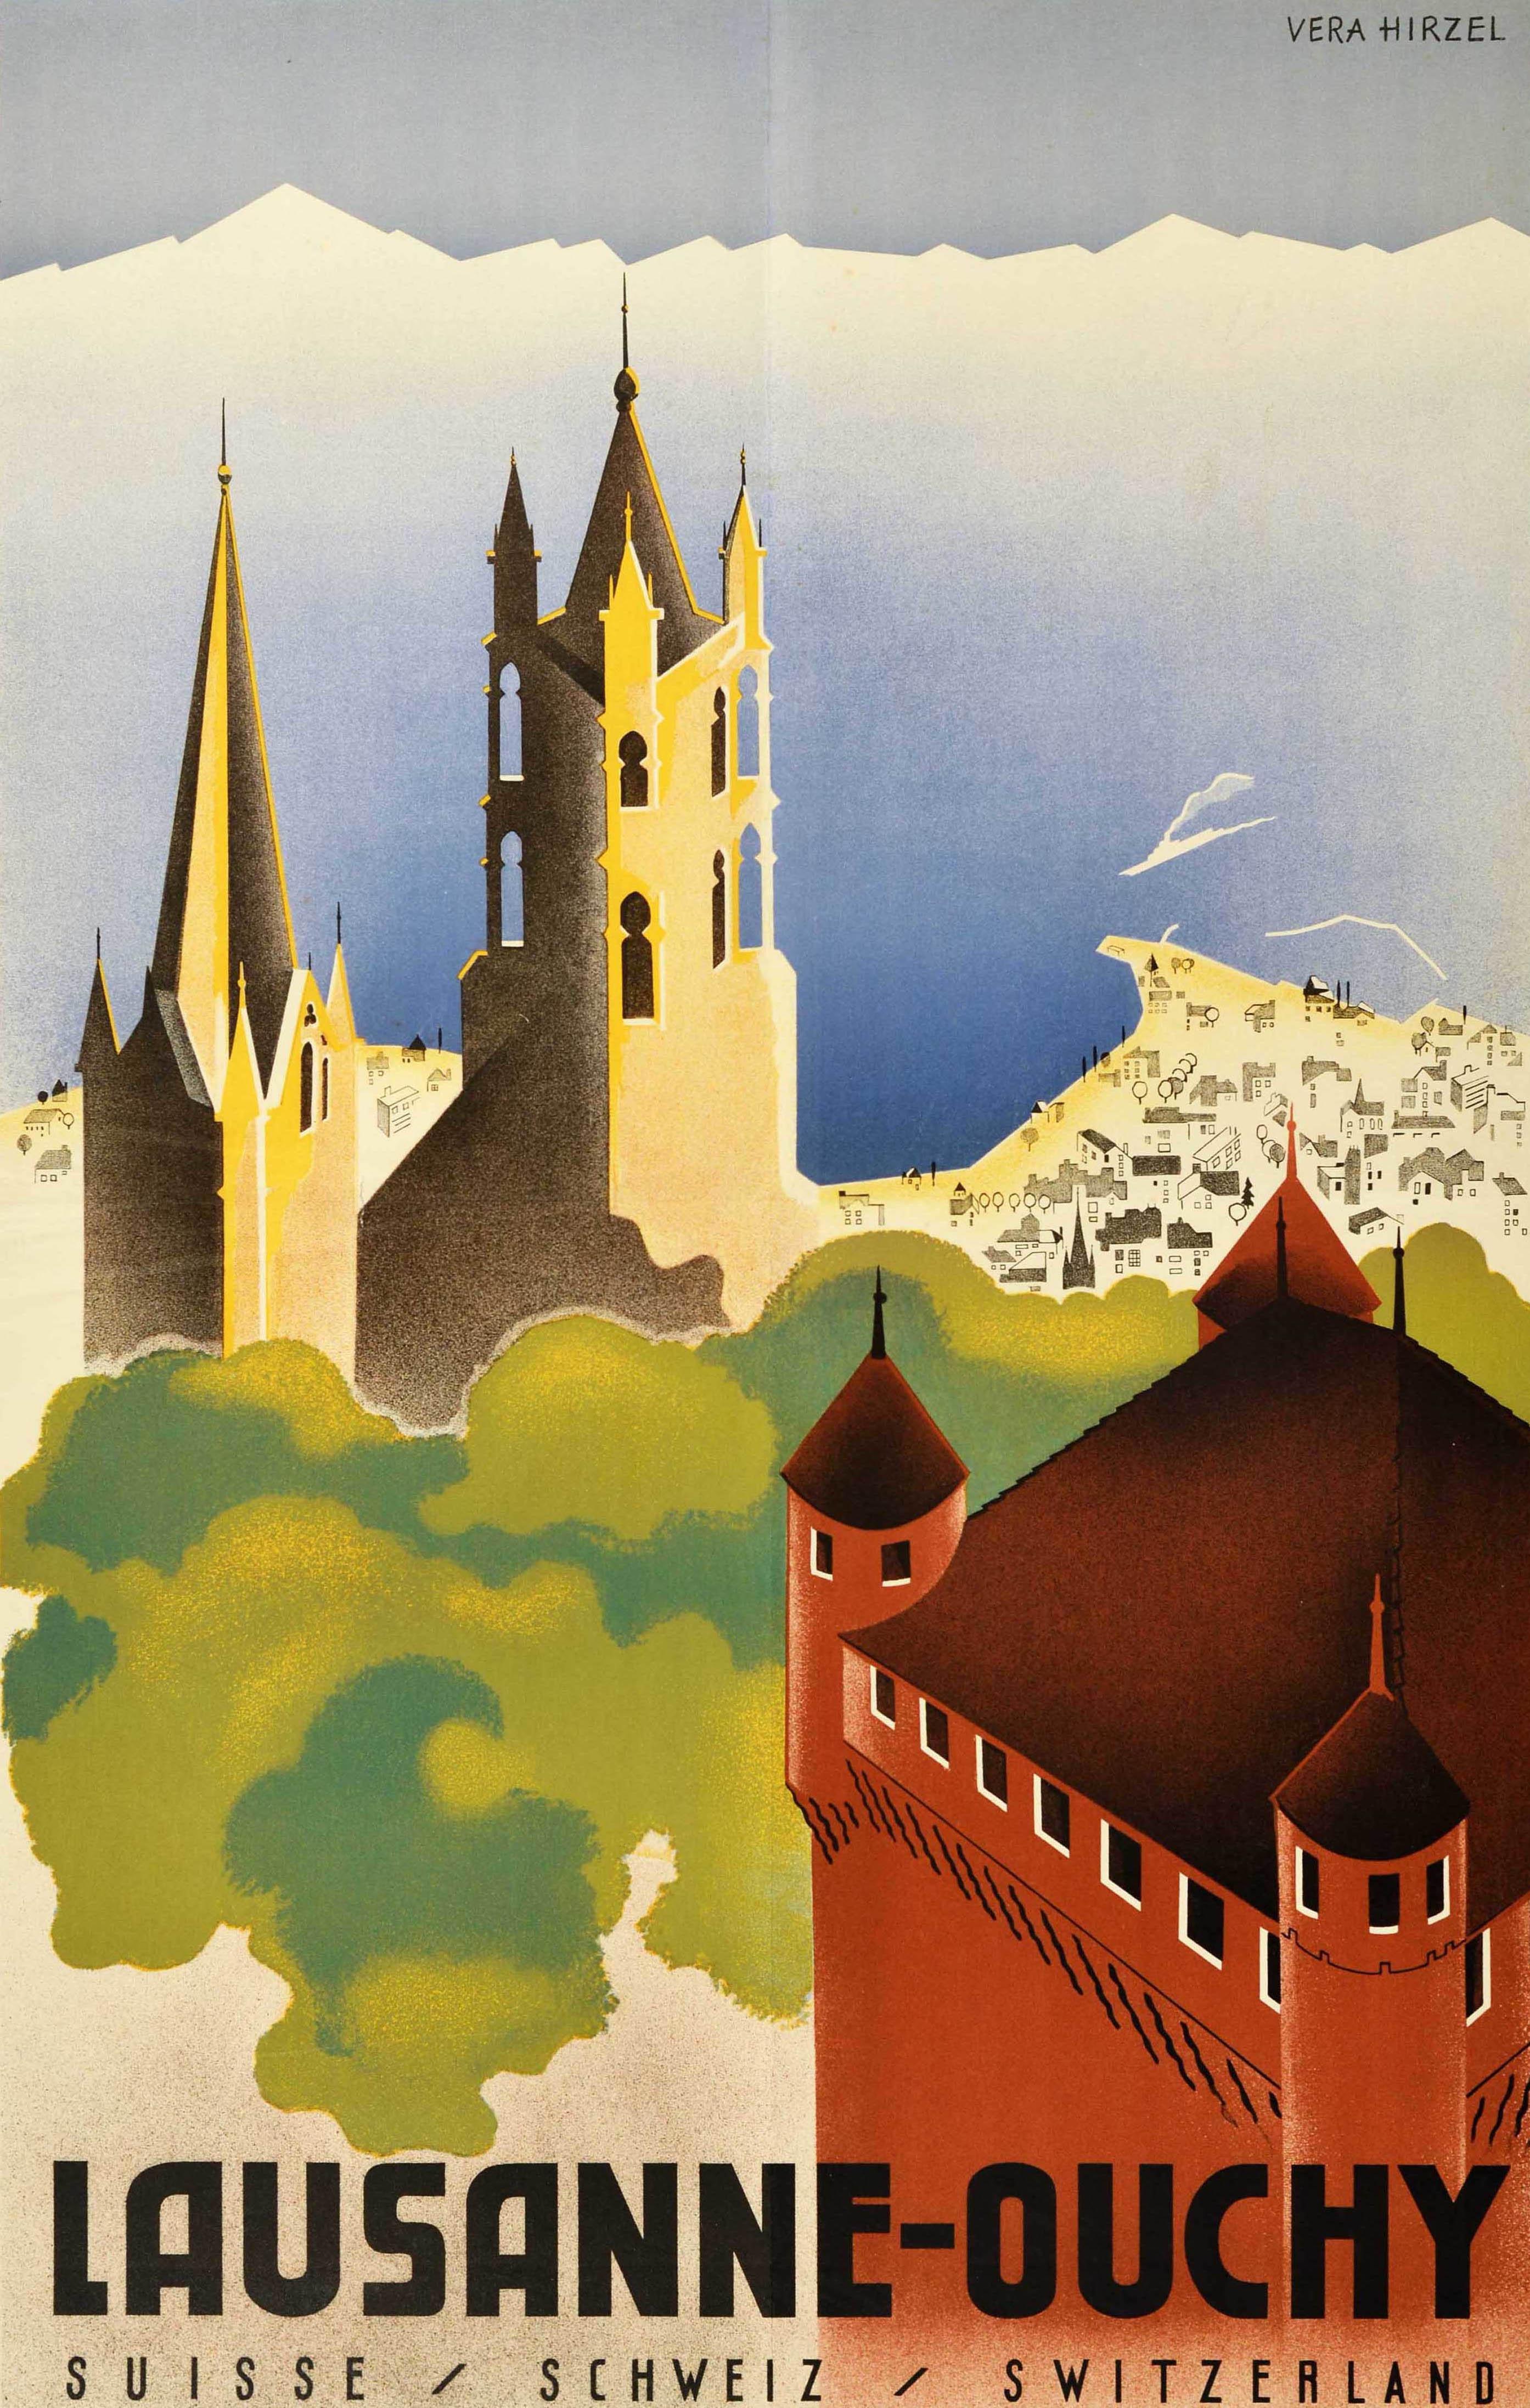 Original vintage travel poster for Lausanne-Ouchy Suisse Schweiz Switzerland featuring a stunning Art Deco illustration depicting a scenic view over the historical Gothic spires of the Cathedral of Lausanne and the renovated Chateau d'Ouchy medieval